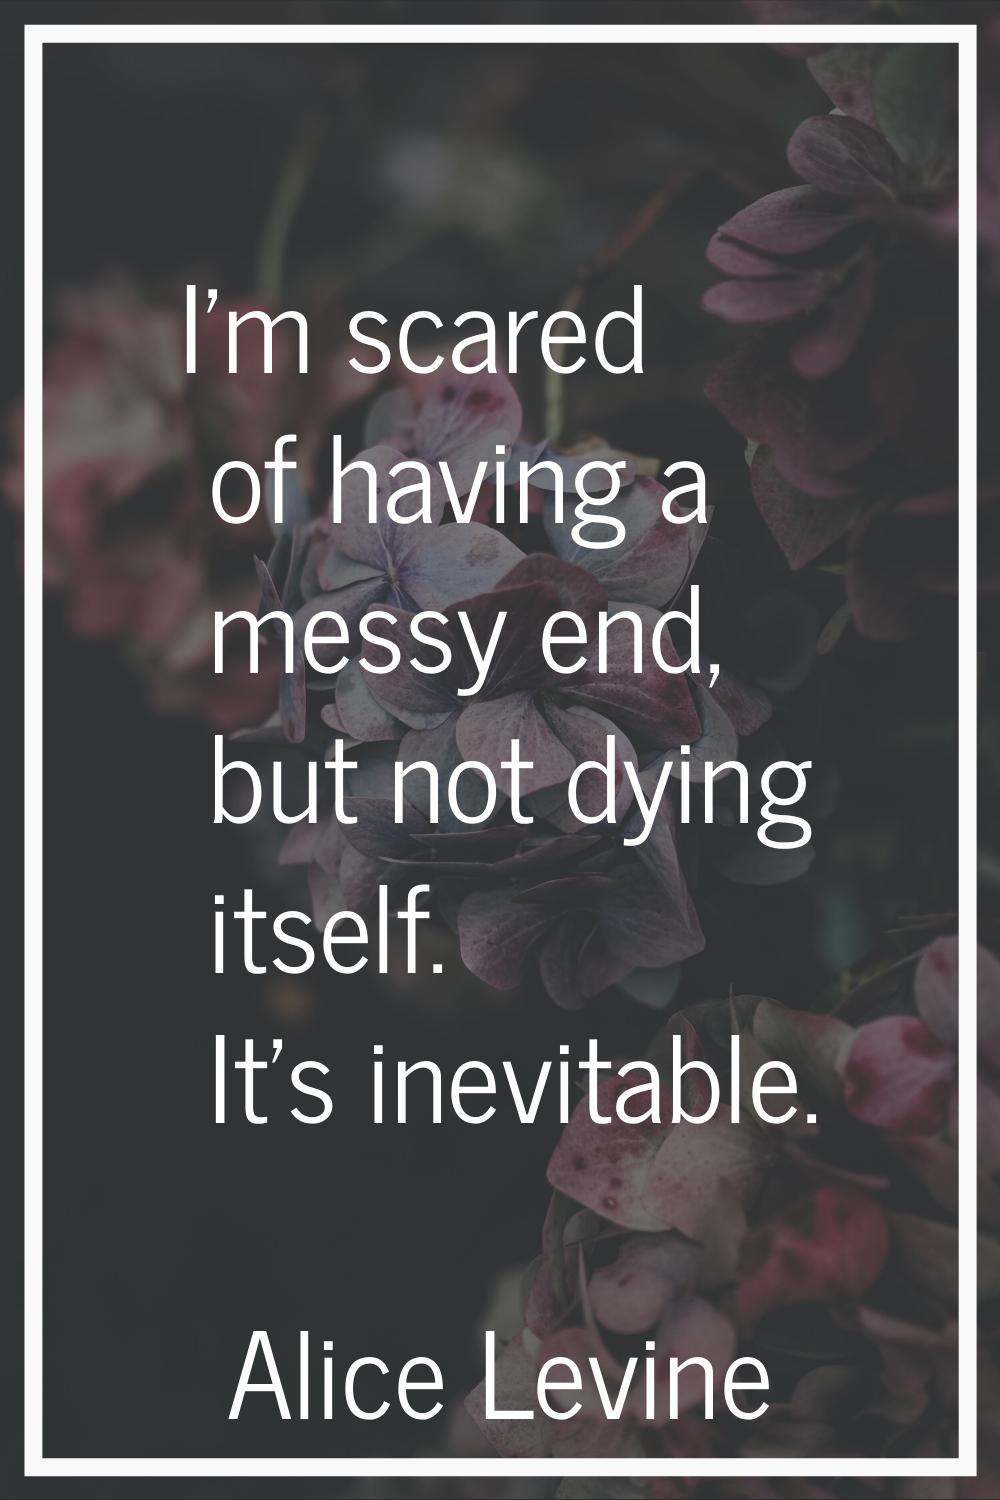 I'm scared of having a messy end, but not dying itself. It's inevitable.